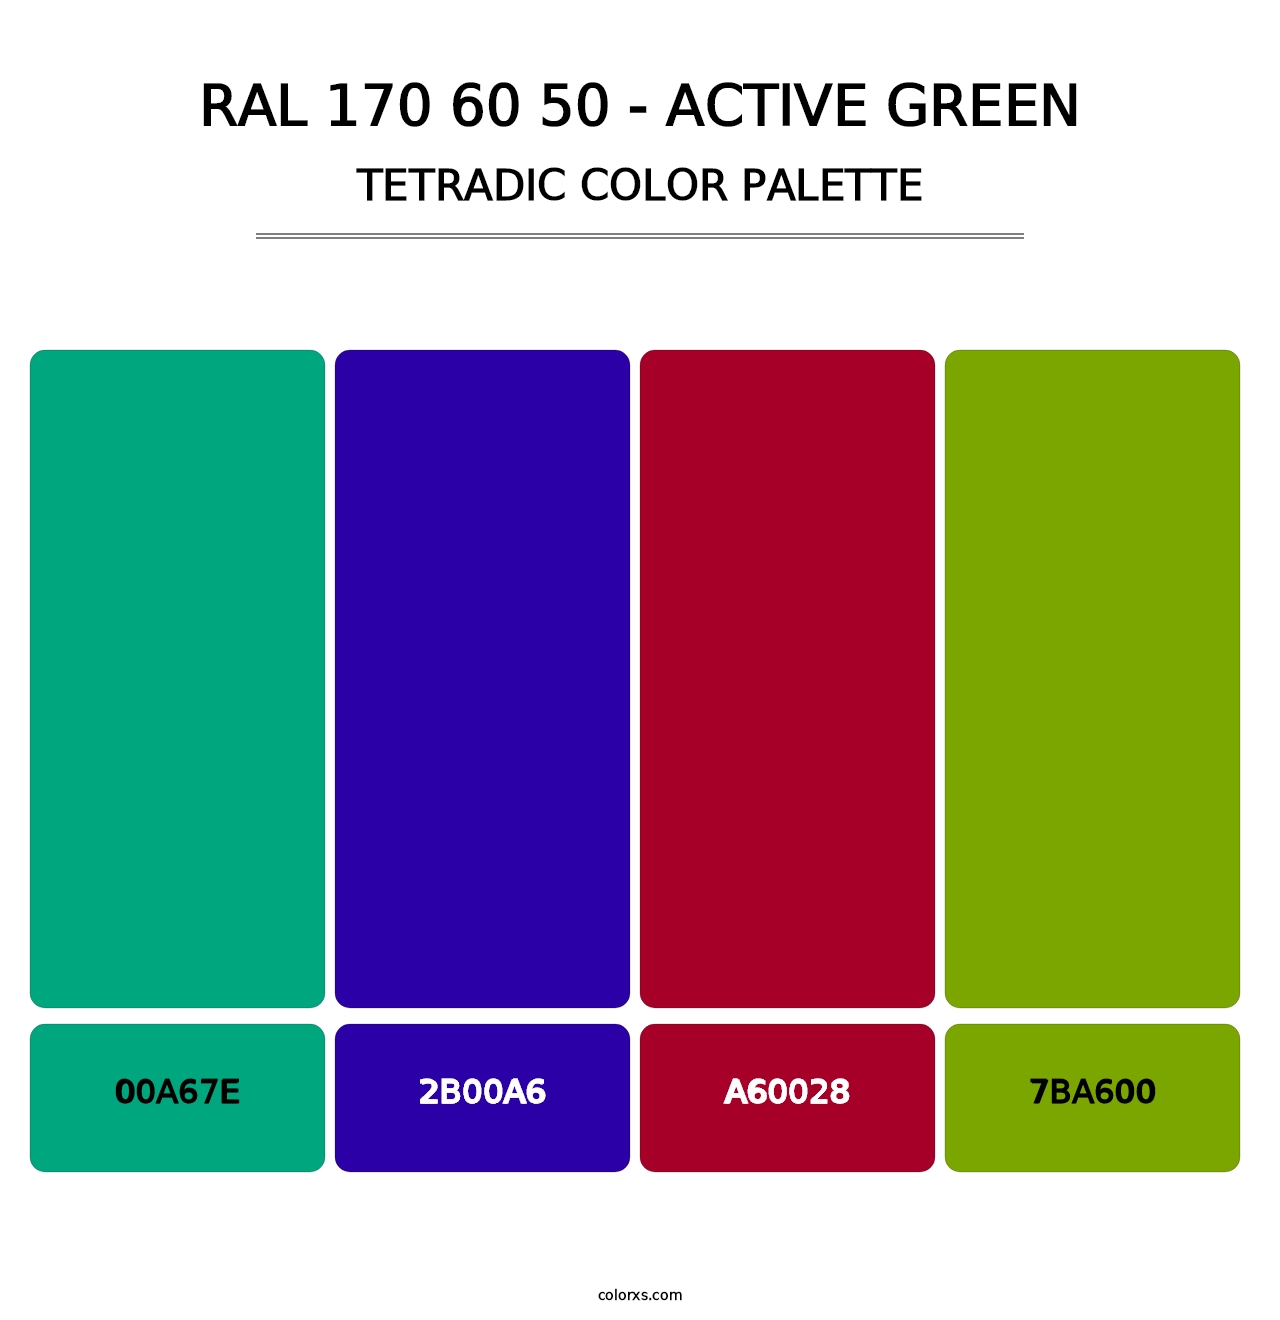 RAL 170 60 50 - Active Green - Tetradic Color Palette